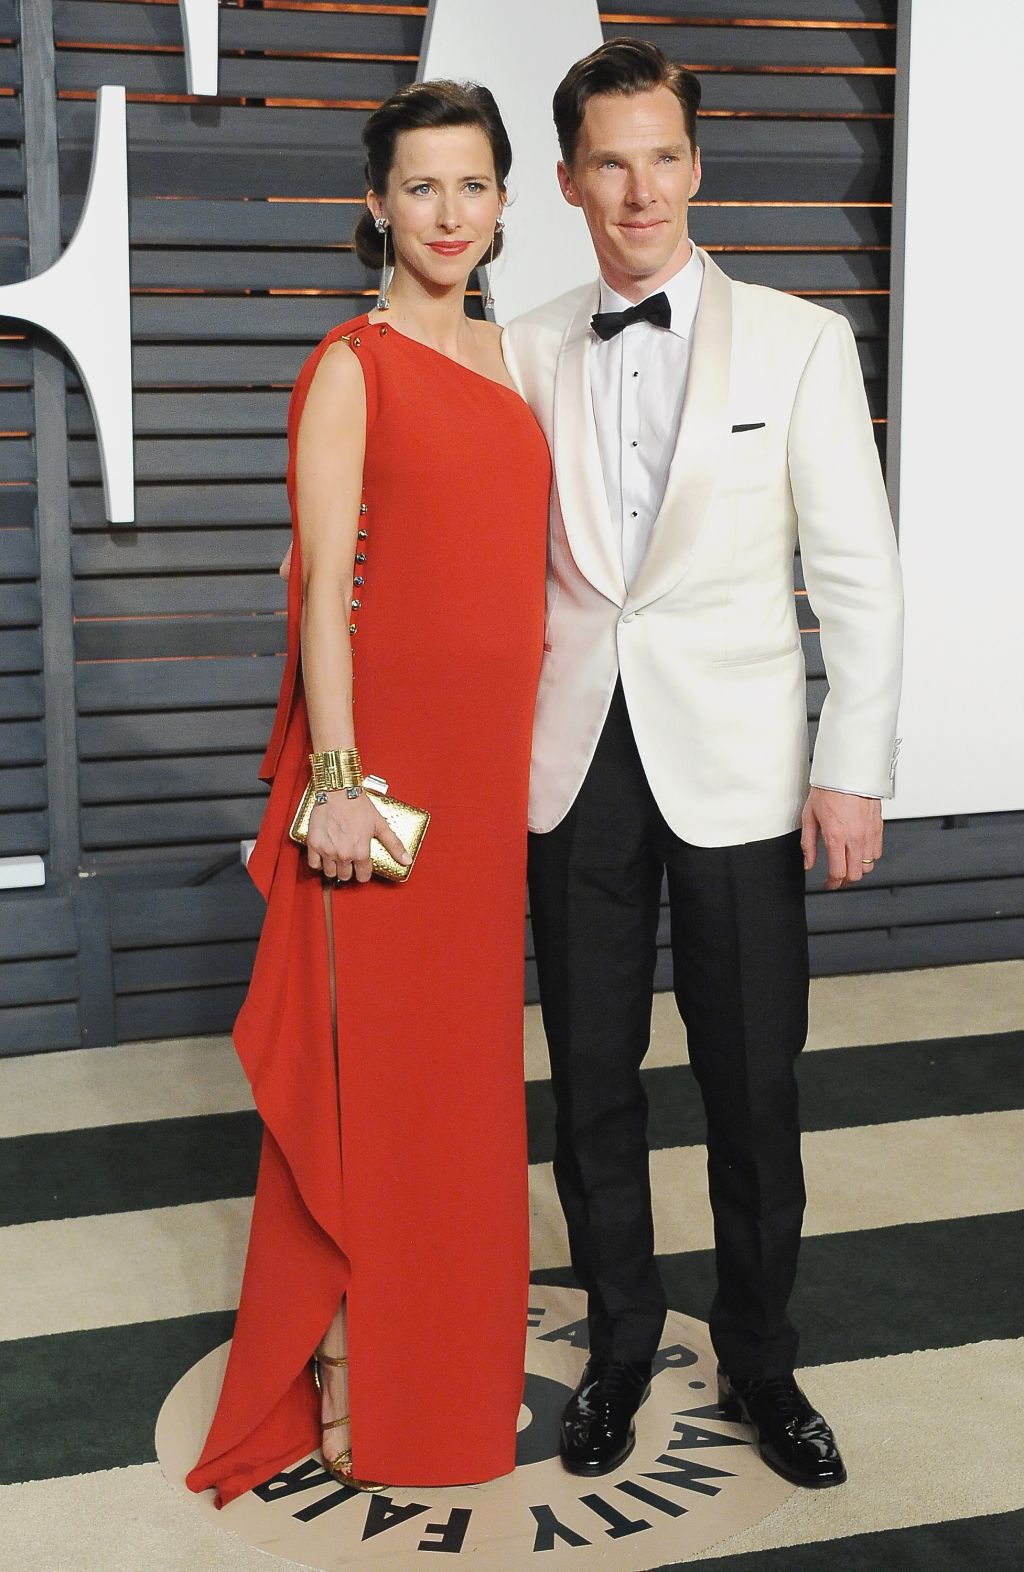 Benedict Cumberbatch and wife Sophie Hunter at Vanity Fair Oscar Party 2015